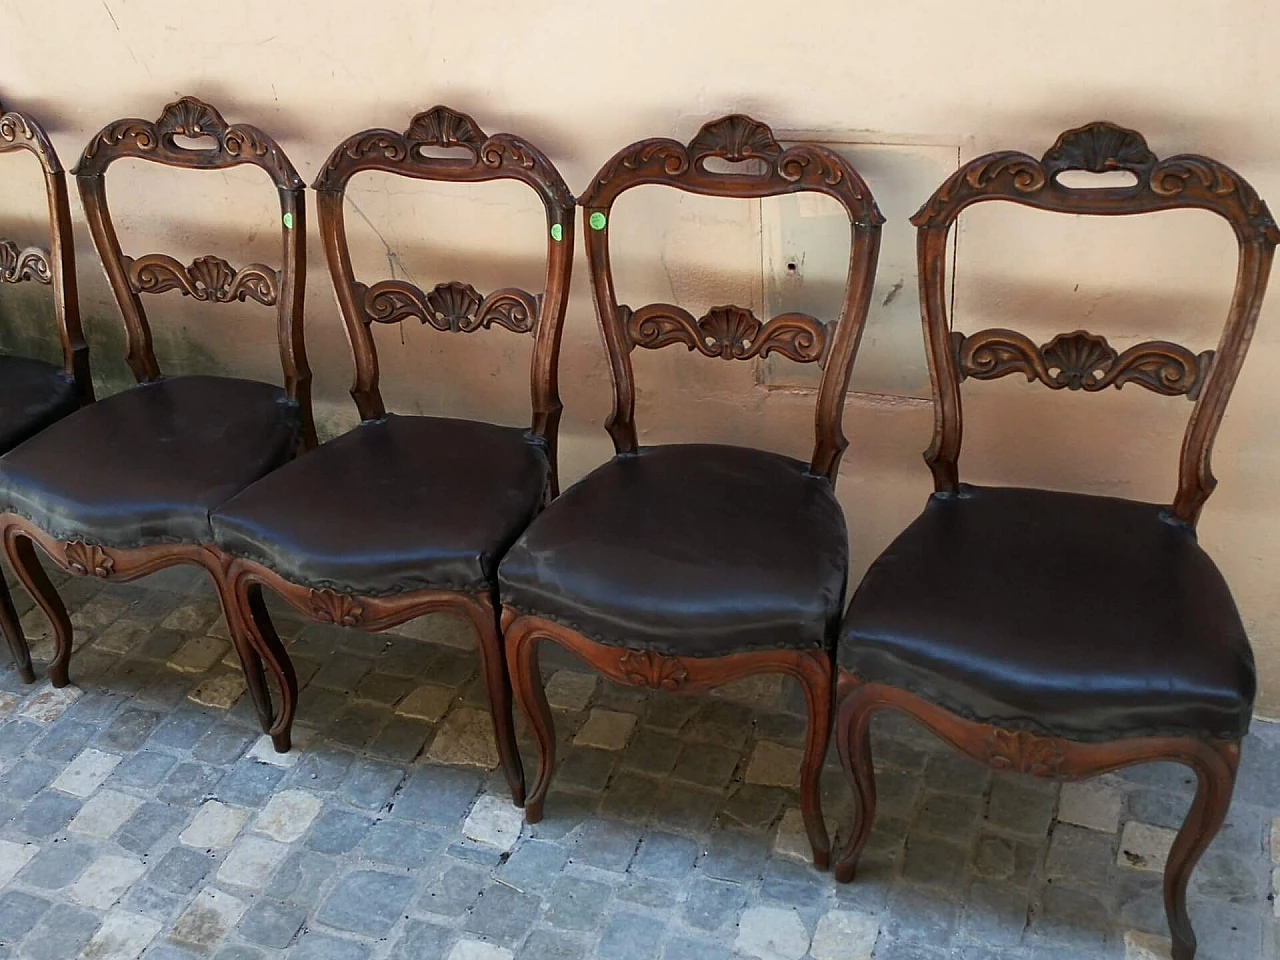 6 Louis XVI walnut chairs with leather covers, Veneto, late 18th century 1310495